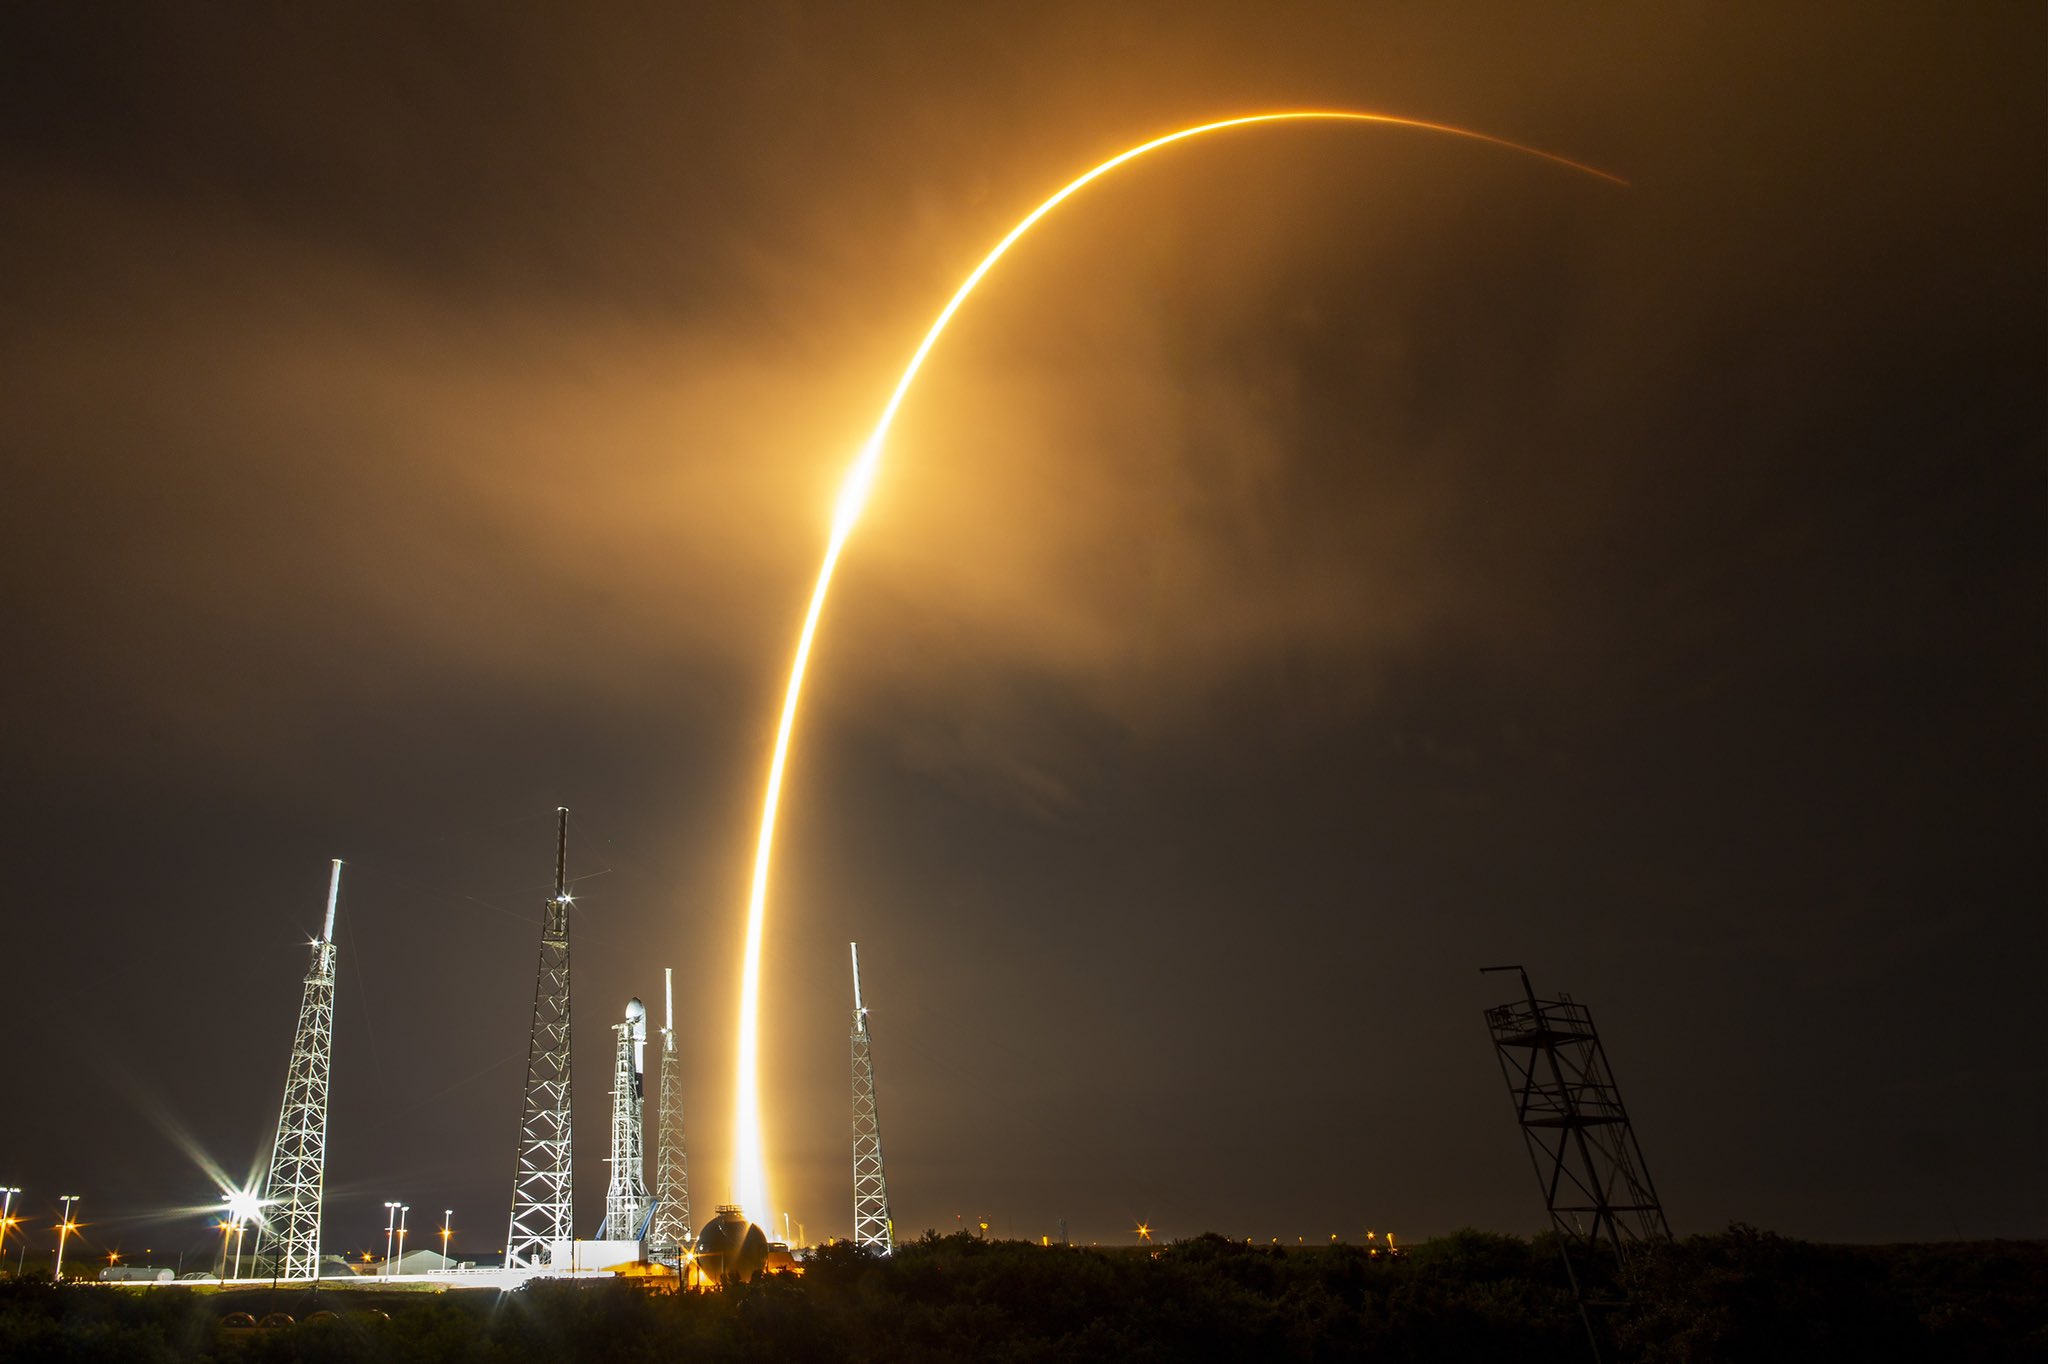 SpaceX Falcon 9 lifts off a record-breaking 14th time to deploy a Starlink fleet & BlueWalker-3 satellite -'One of our most complex missions,' says Elon Musk